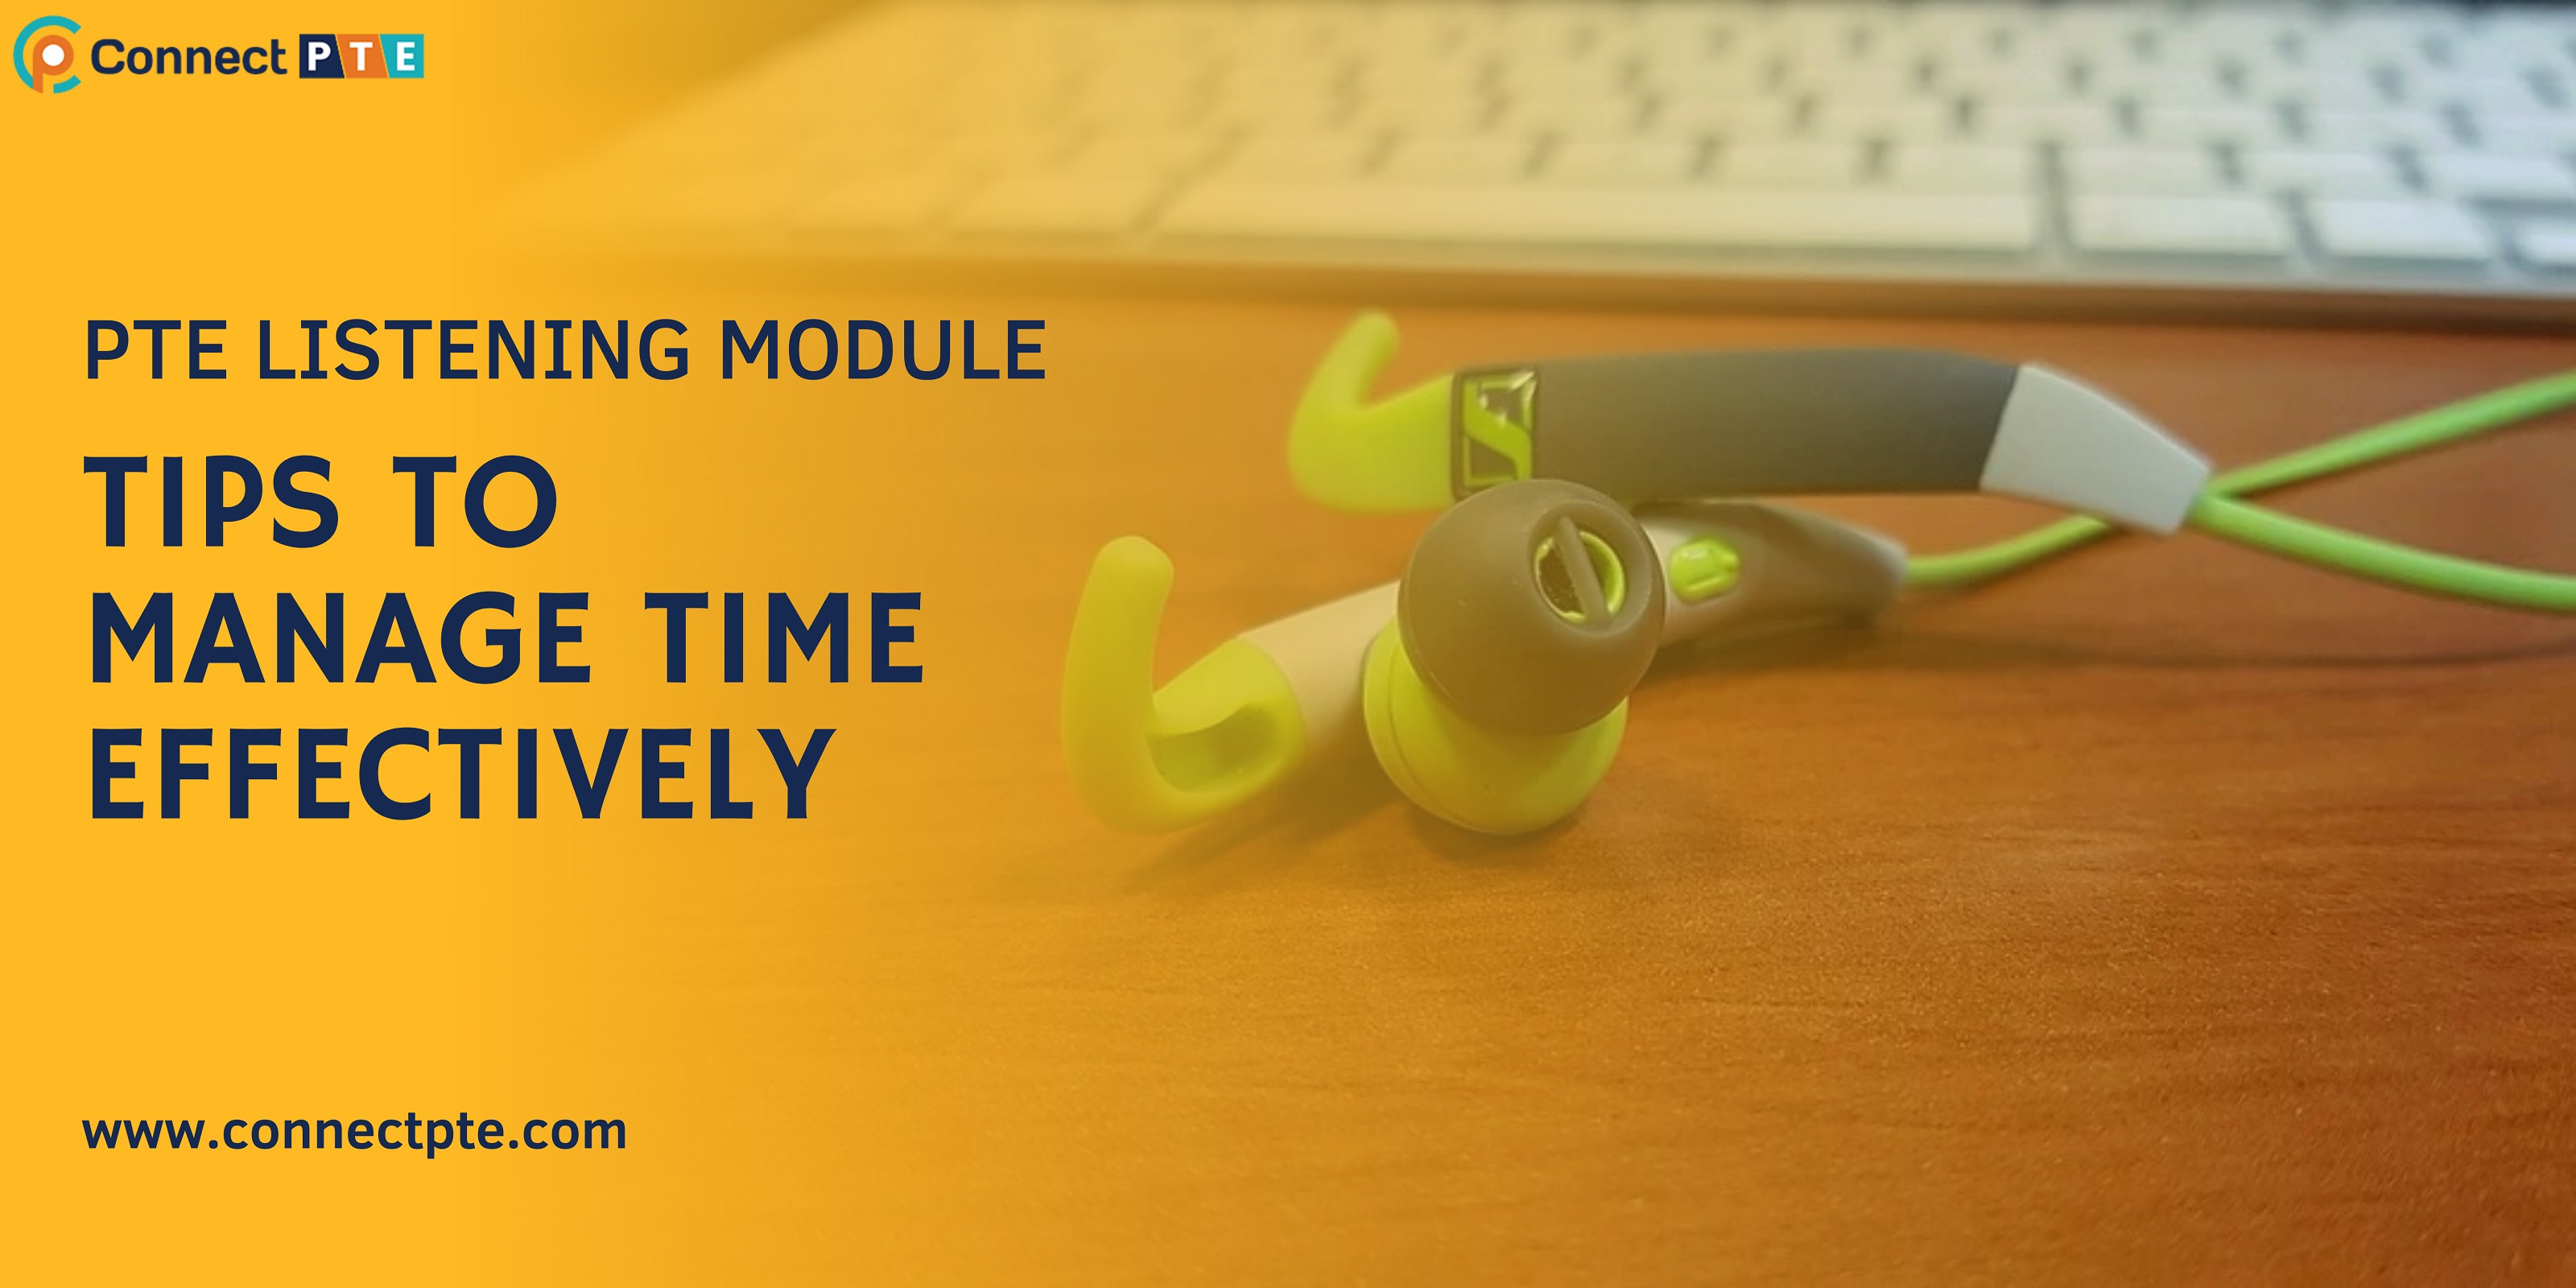 TIPS TO MANAGE TIME EFFECTIVELY IN PTE LISTENING MODULE